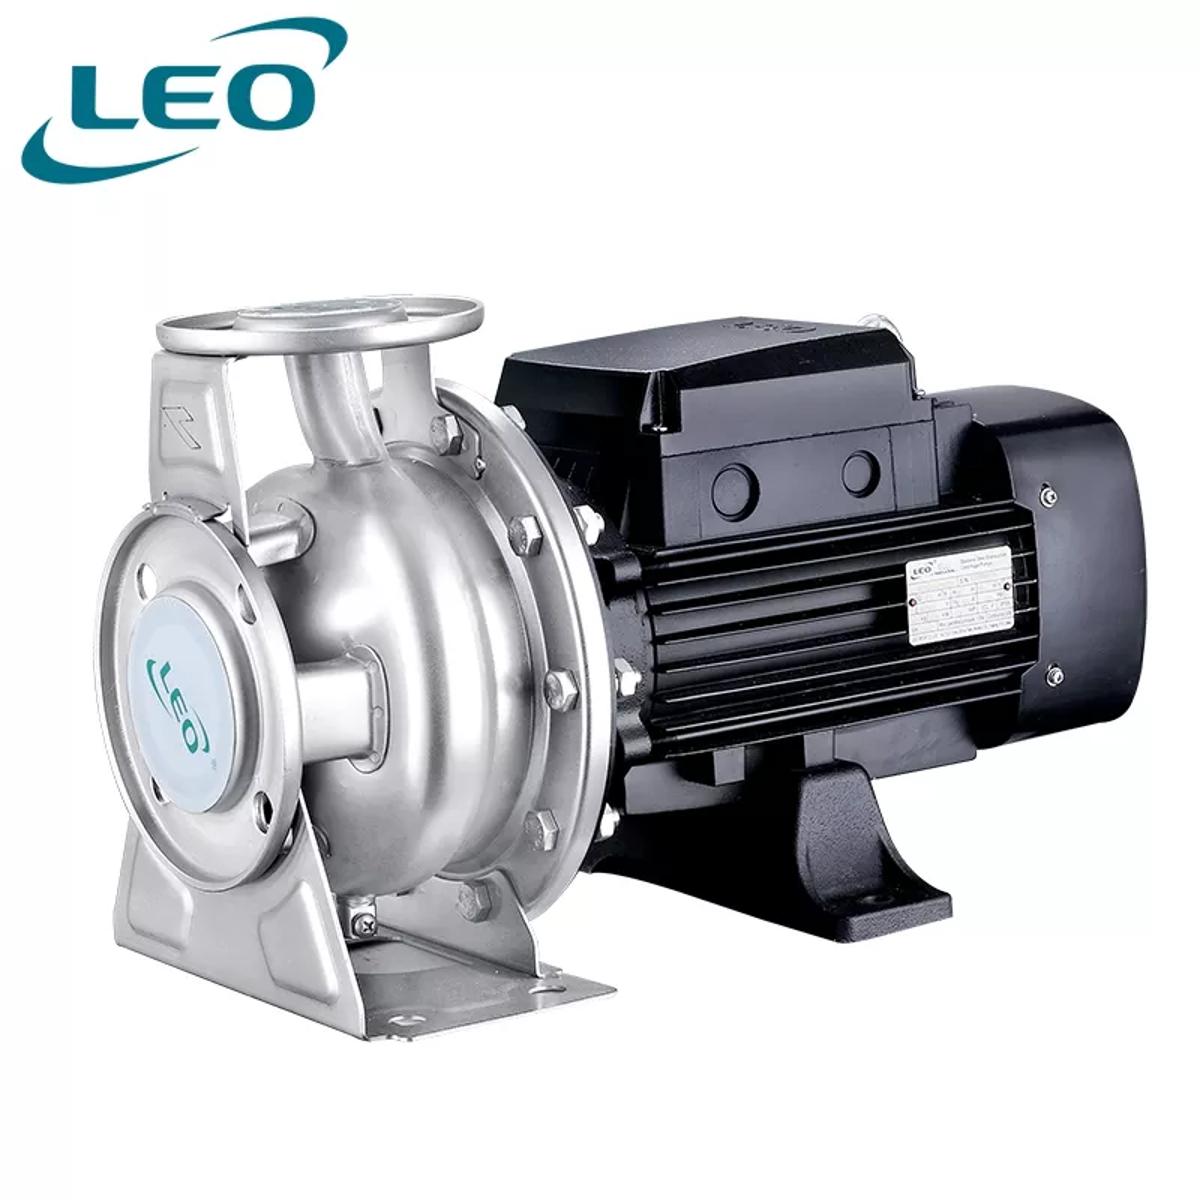 LEO - XZS-50-32-200-40 - 4000 W - 5.5 HP - Clean Water Stainless Steel HEAVY DUTY Centrifugal Pump FLANGE TYPE  - 380V~400V THREE PHASE - SIZE :- 2" x 1 1-4 " - European STANDARD